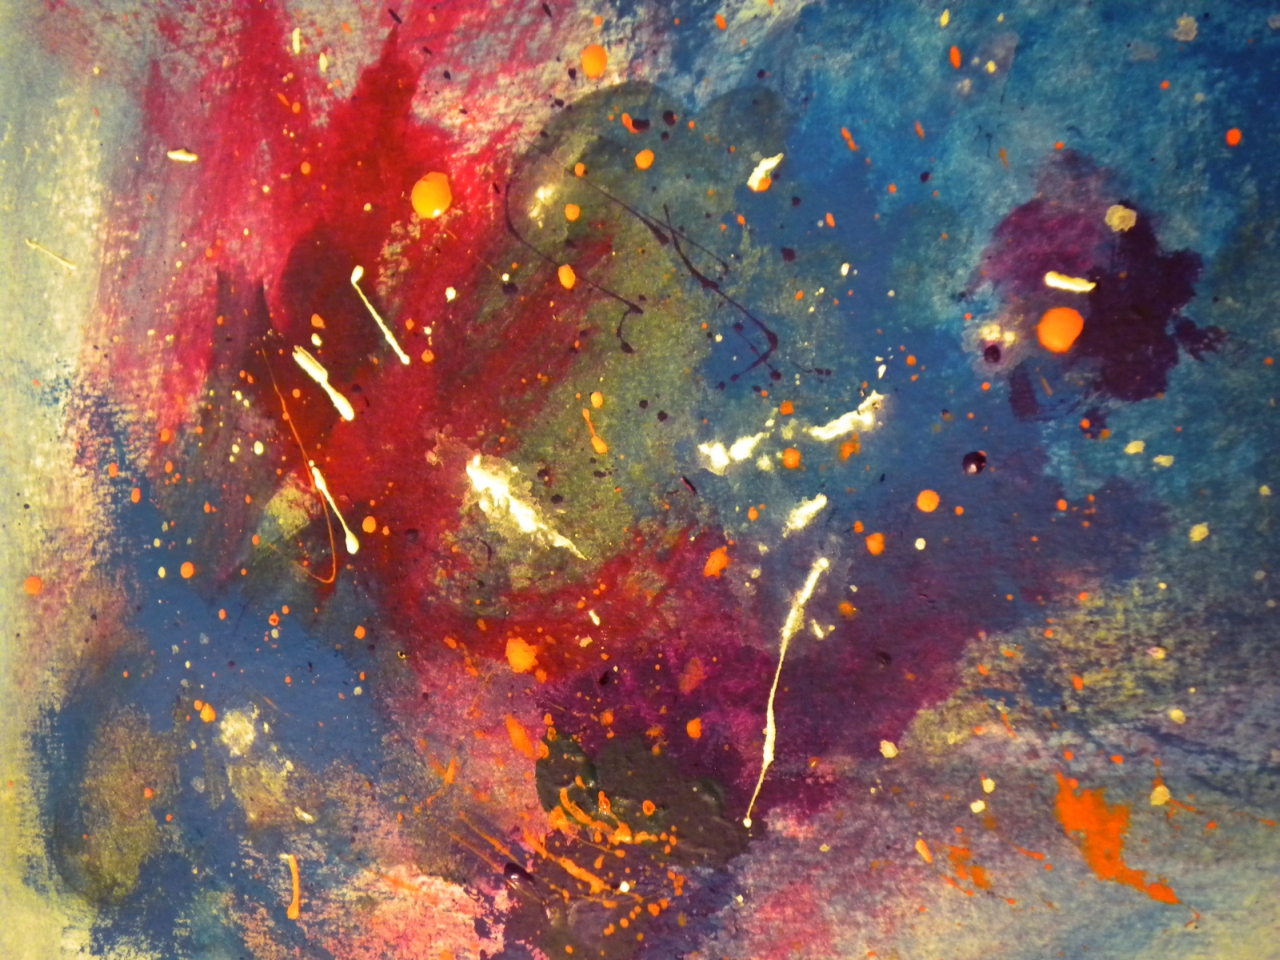 Abstract Painting Wincustomize Explore Watercolor Wallpaper